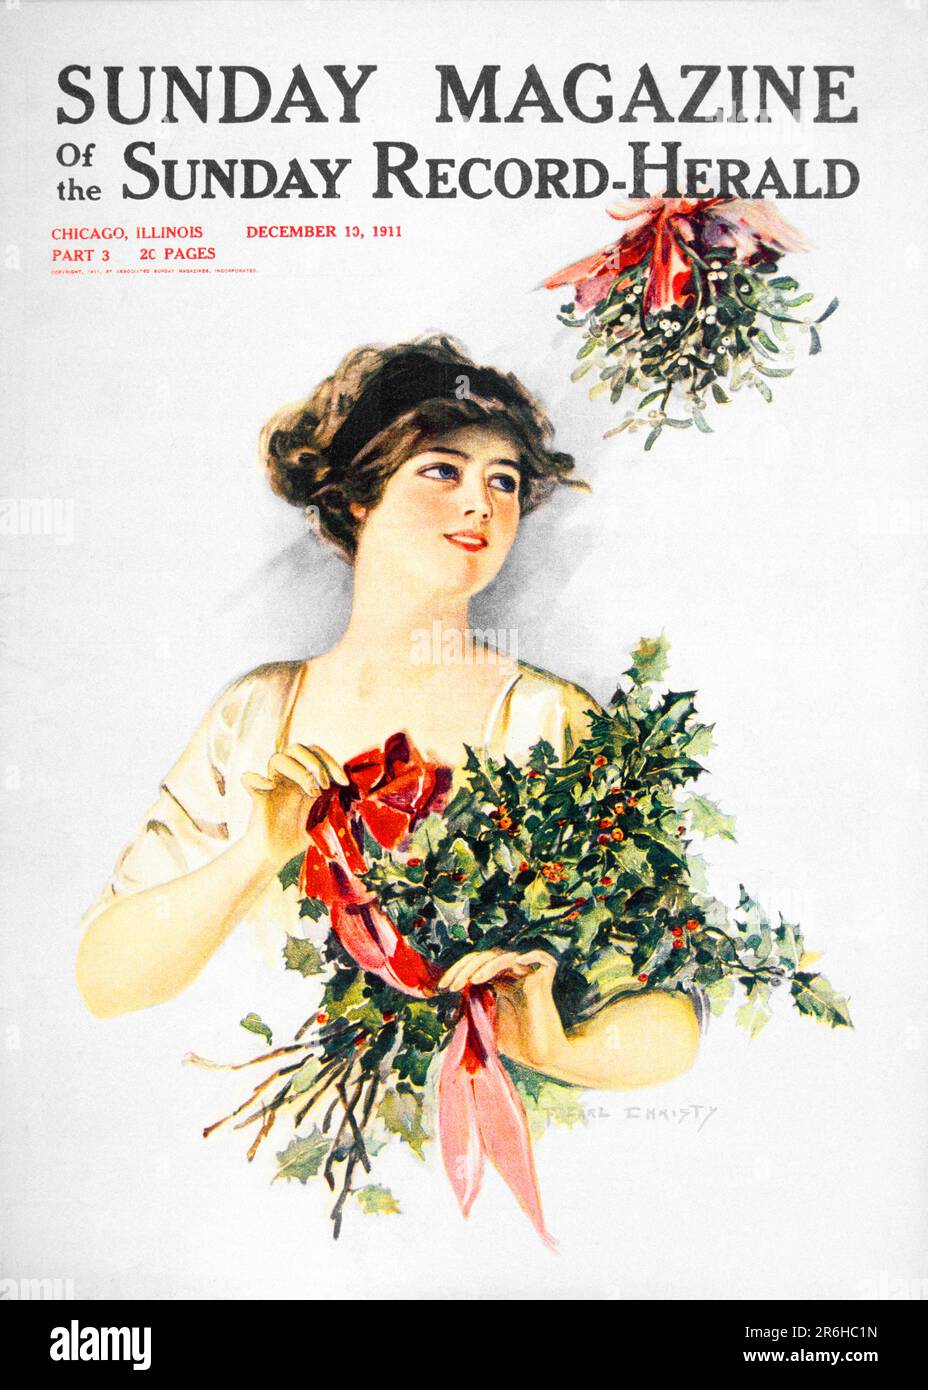 1910s BRUNETTE YOUNG WOMAN LOOKING UP AT CHRISTMAS MISTLETOE DECORATION WHILE HOLDING RED RIBBON BOUQUET OF HOLLY - kh13595 NAW001 HARS COVER CELEBRATION FEMALES SUNDAY HOME LIFE COPY SPACE HALF-LENGTH LADIES PERSONS INSPIRATION ARTIST CONFIDENCE BRUNETTE DECORATION DREAMS ADVENTURE MERRY LOW ANGLE HOLLY SUNDAY MAGAZINE UP DECEMBER CONCEPTUAL DECEMBER 25 IMAGINATION STYLISH HERALD JOYOUS YOUNG ADULT WOMAN CAUCASIAN ETHNICITY GREENS OLD FASHIONED Stock Photo